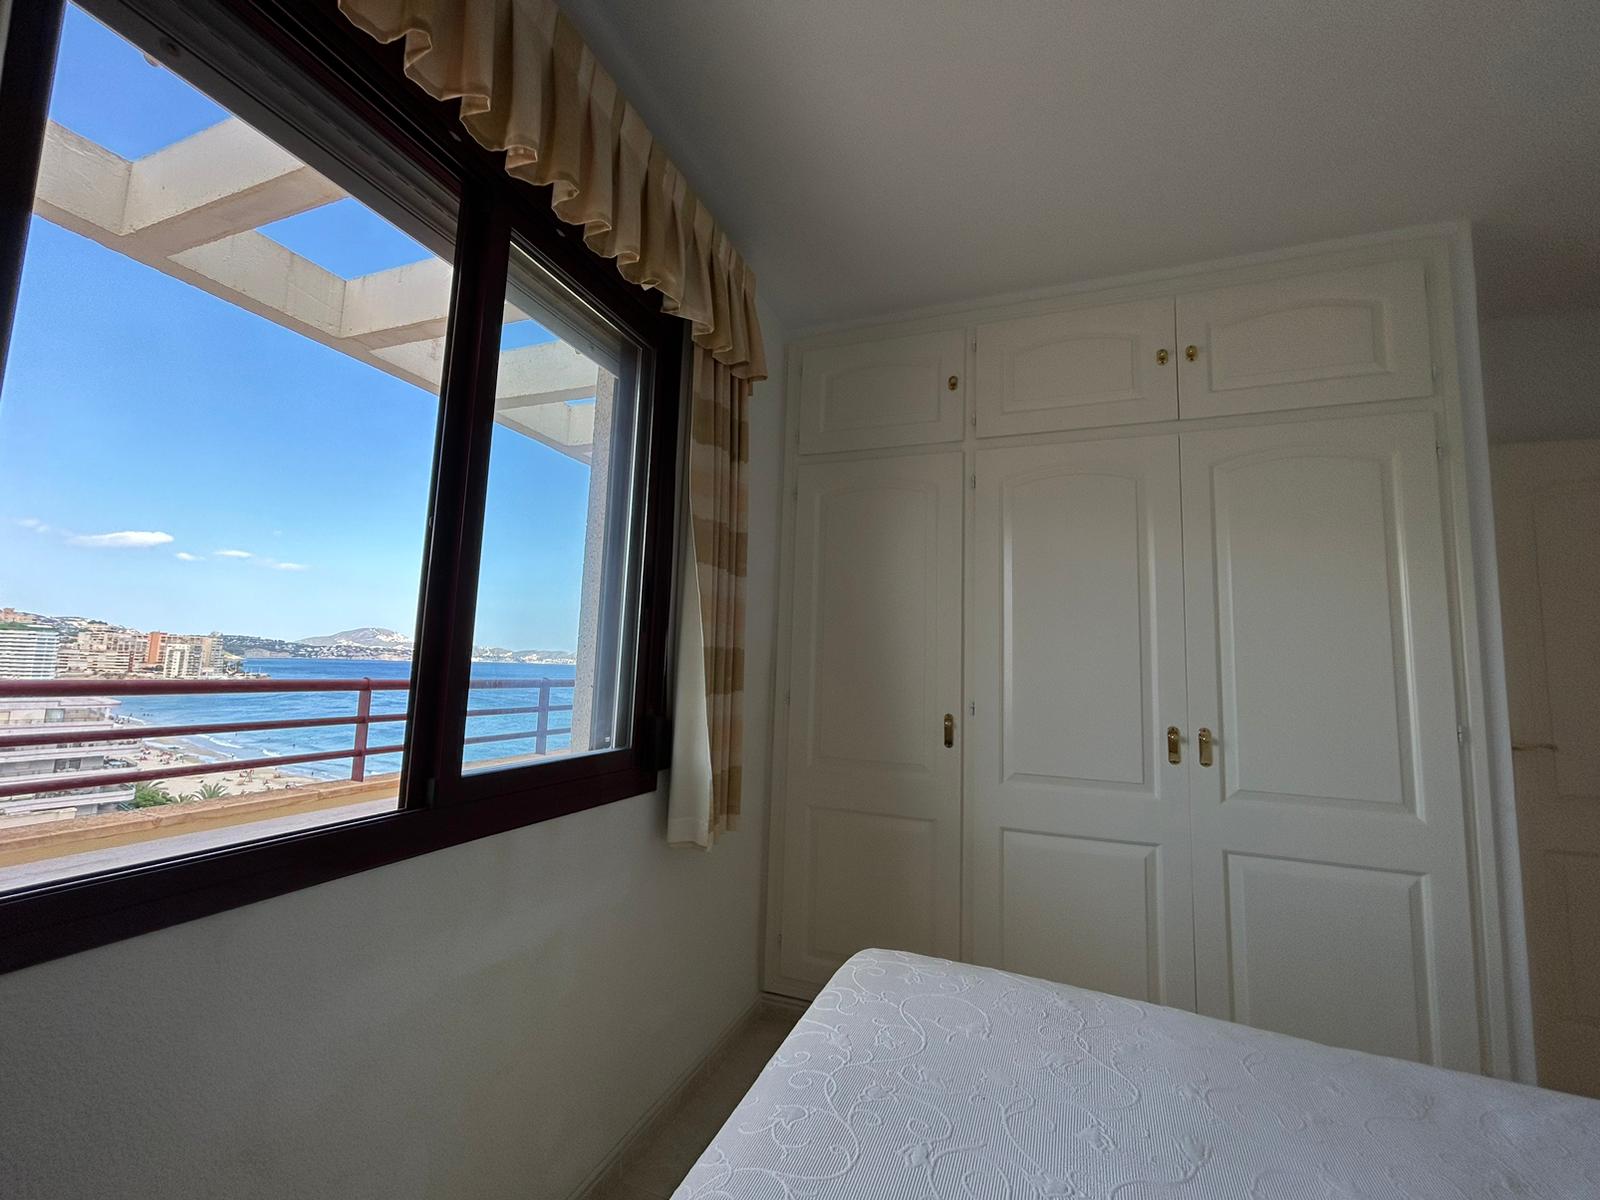 2 bedroom penthouse with sea views